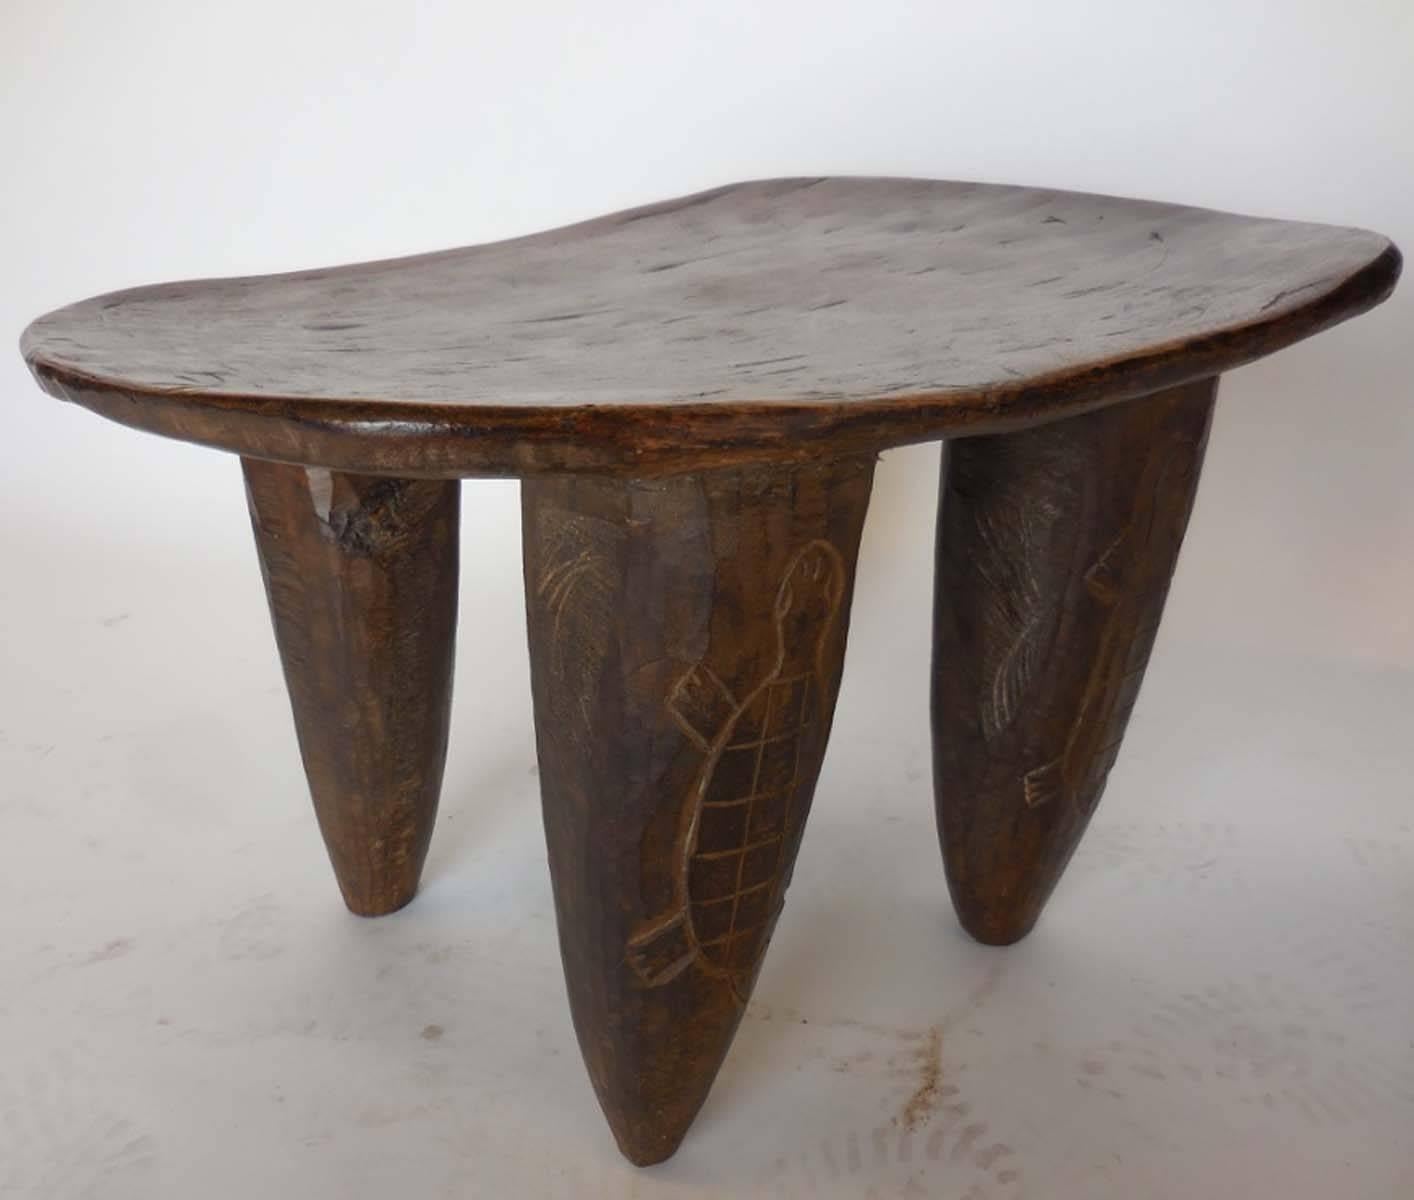 20th Century Tribal Hand-Carved Stool from Mali - LEFT ONE AVAILABLE